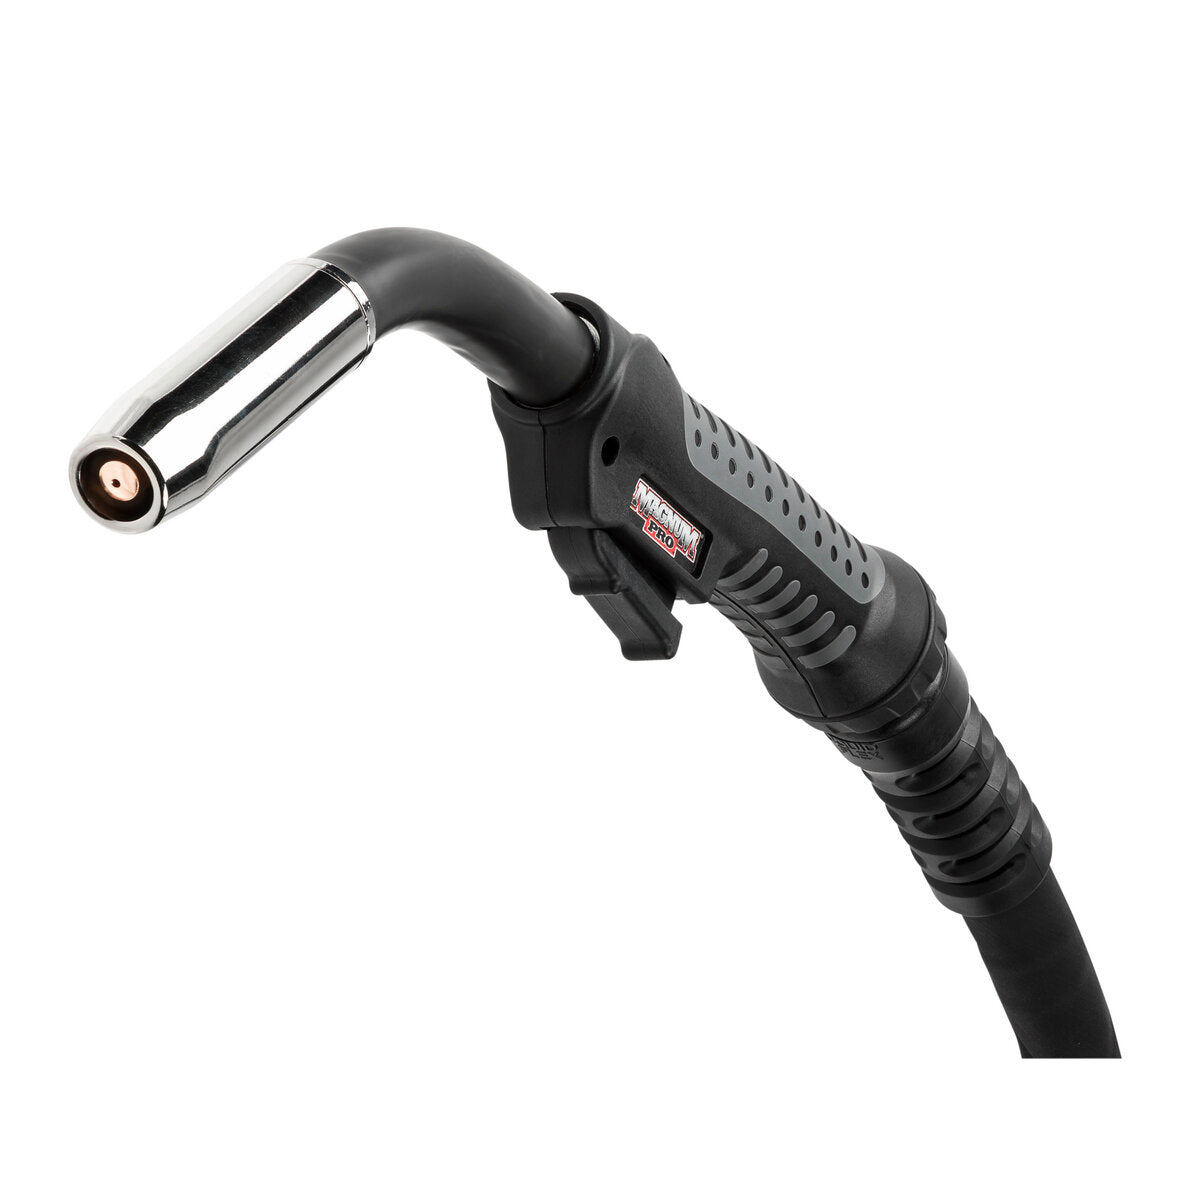 Lincoln Electric - Magnum® PRO 500 Water Cooled Welding Guns - K4522-1-10-45